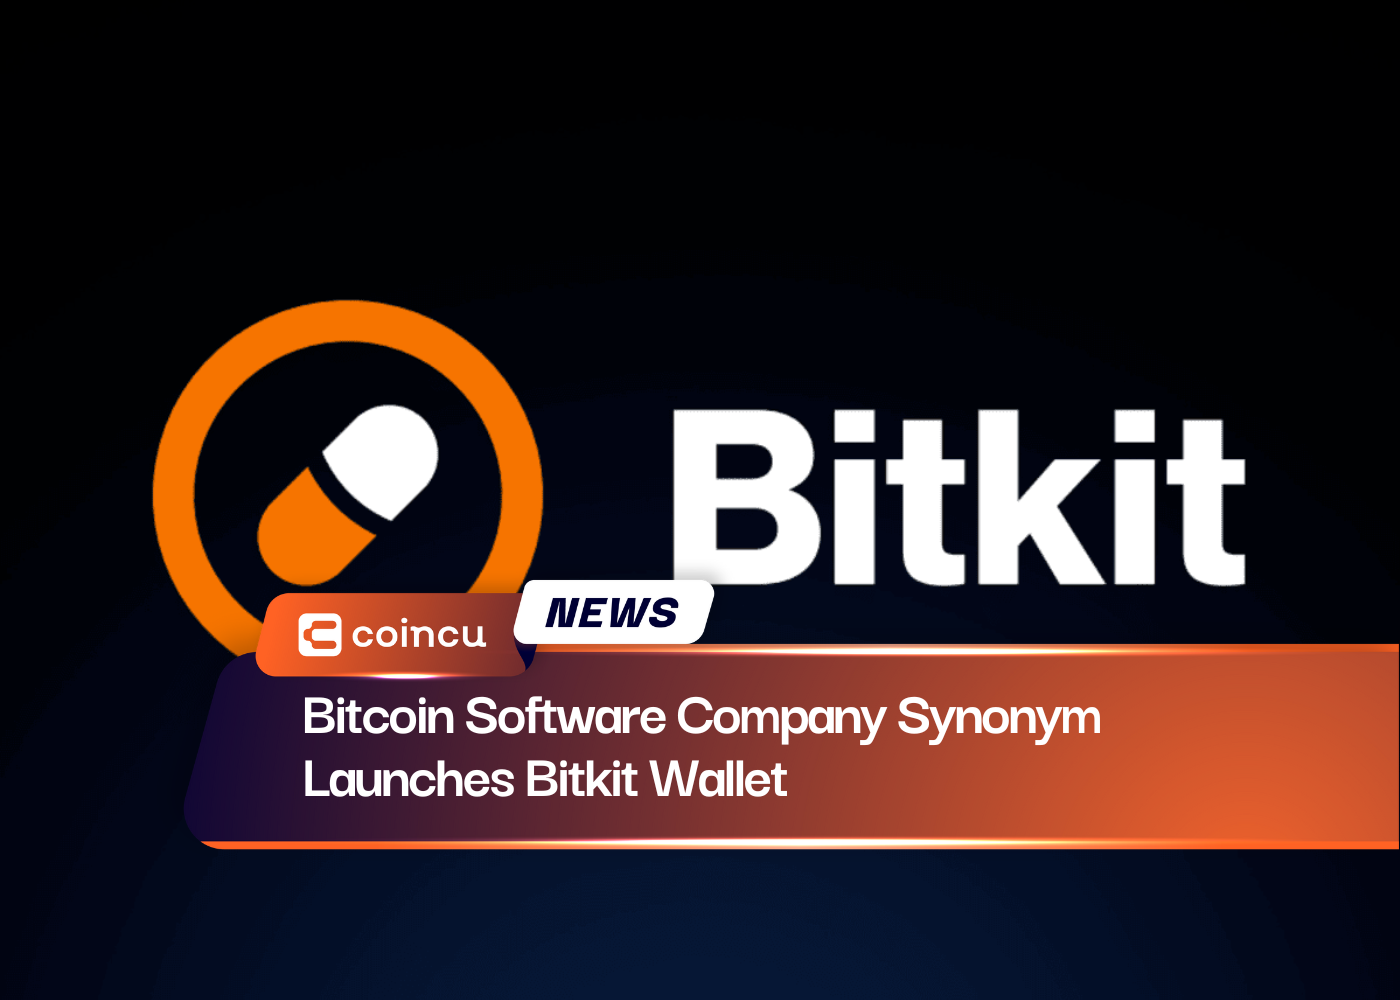 Bitcoin Software Company Synonym Launches Bitkit Wallet